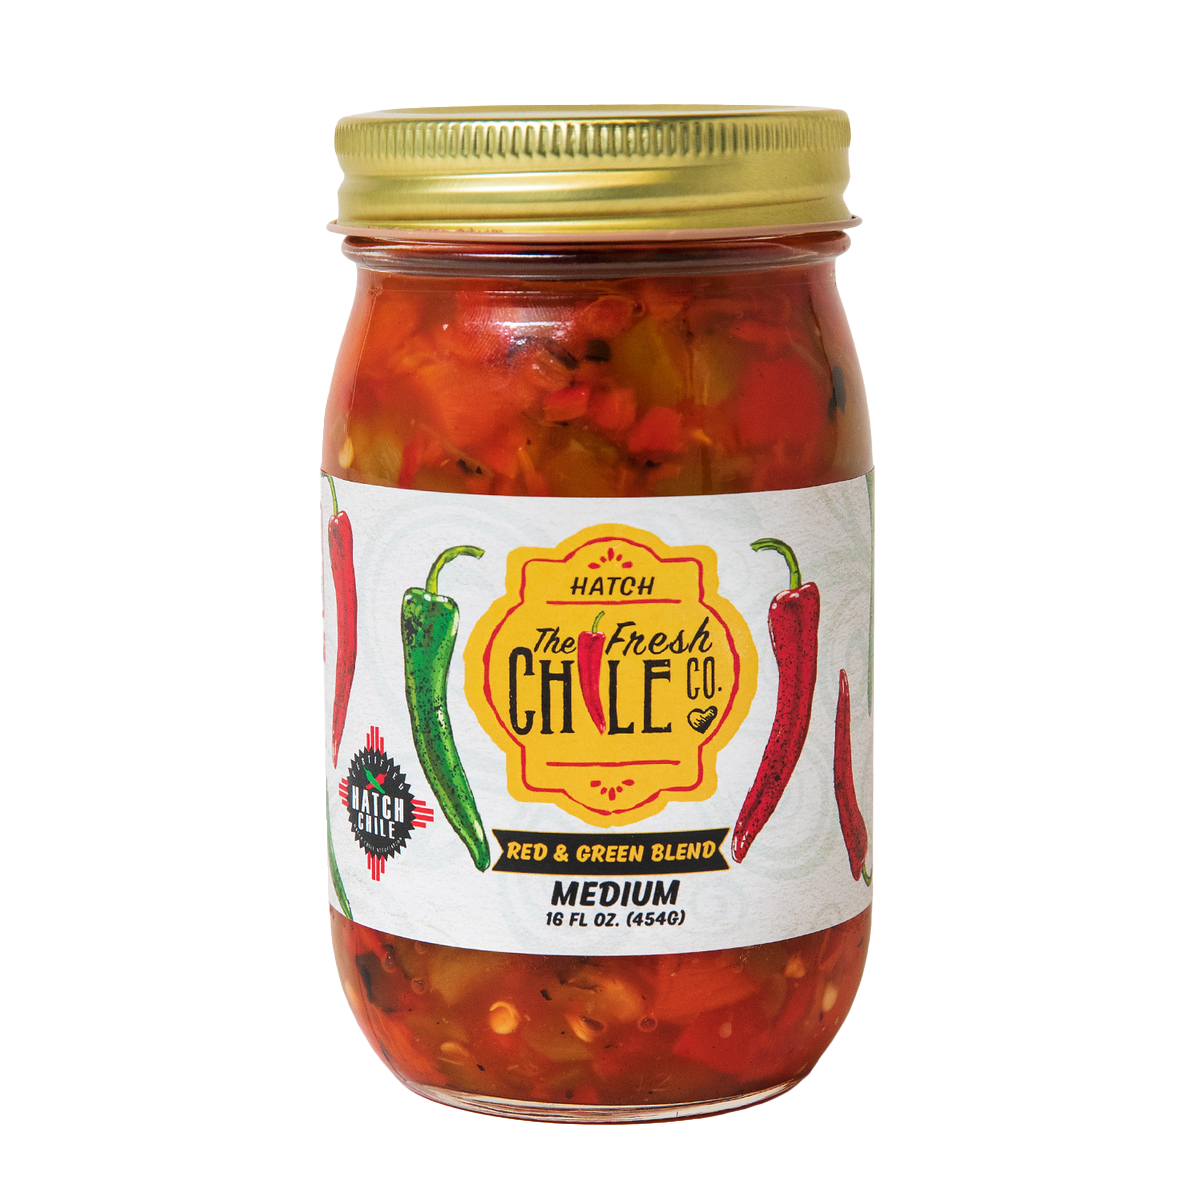 Sentence with the replaced product name: A glass jar of Hatch Red & Green Chile salsa featuring a mix of flame roasted Hatch red and green chiles. The label displays colorful illustrations of peppers with text indicating it's a medium-spiced.